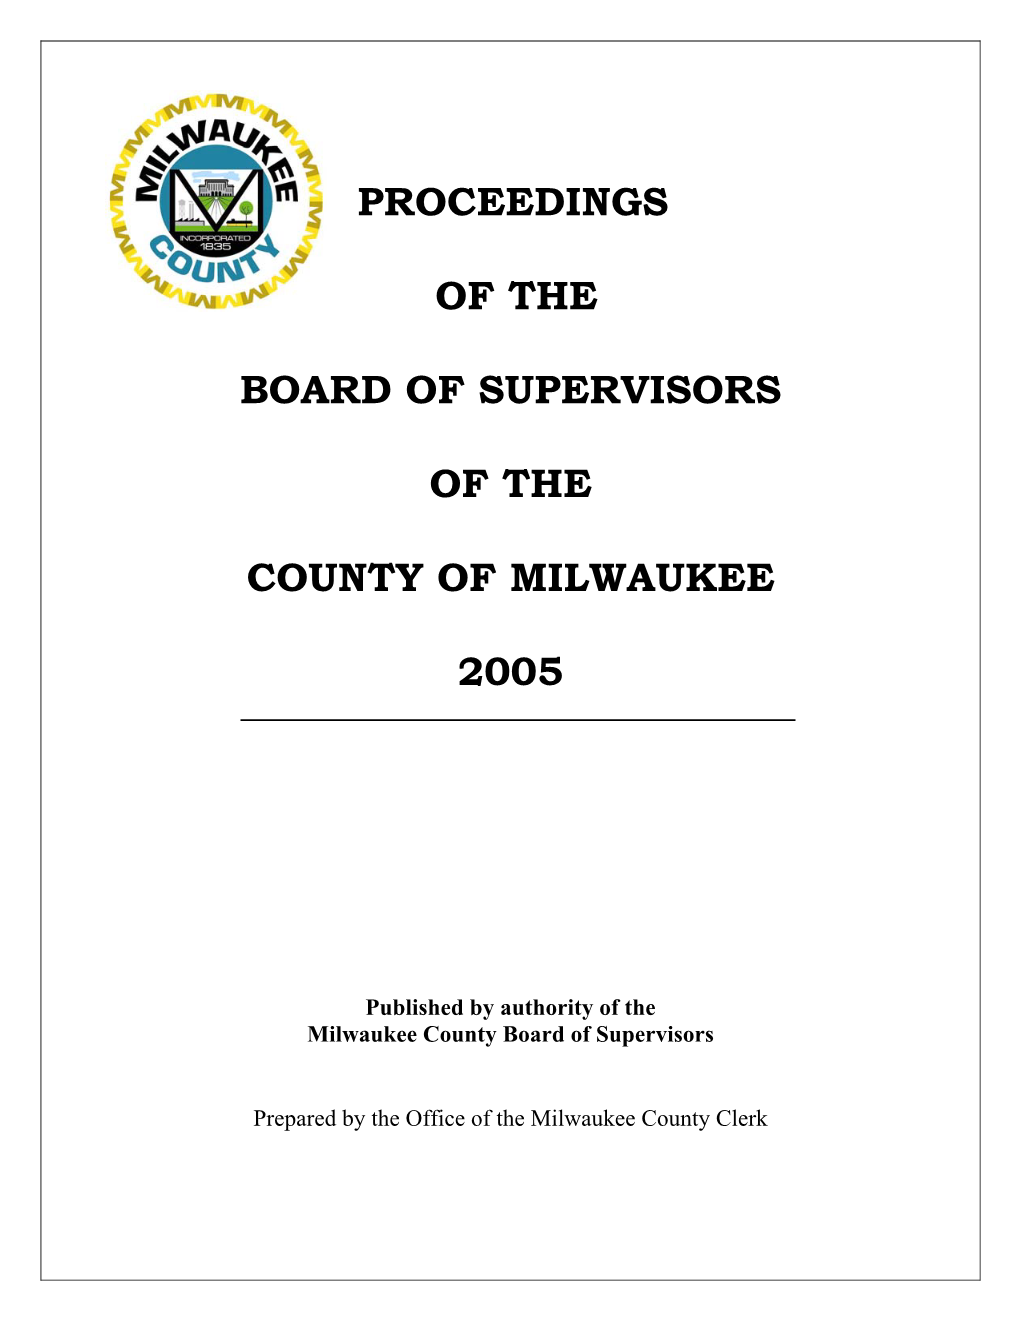 Proceedings of the Board of Supervisors of the County of Milwaukee 2005